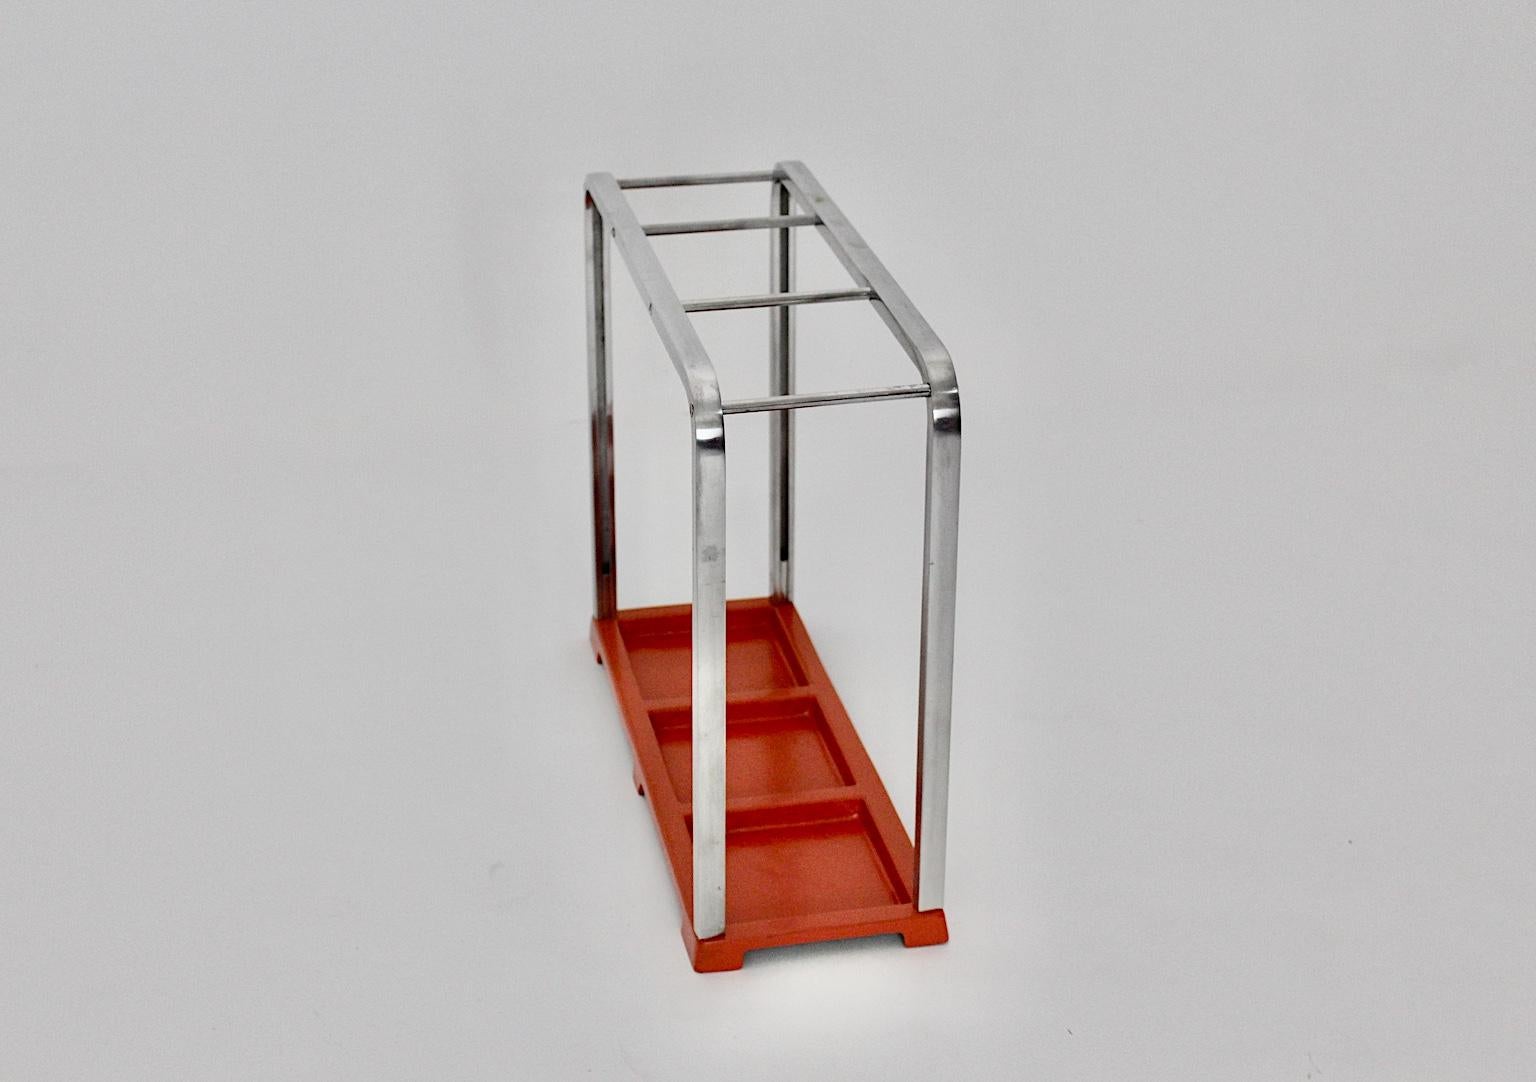  Bauhaus Art Deco era vintage umbrella stand, which was made of cast and polished aluminum.
The base was newly lacquered in the originally red color, while the upper part consists of gentle curved polished aluminum in cleaned condition.
The umbrella